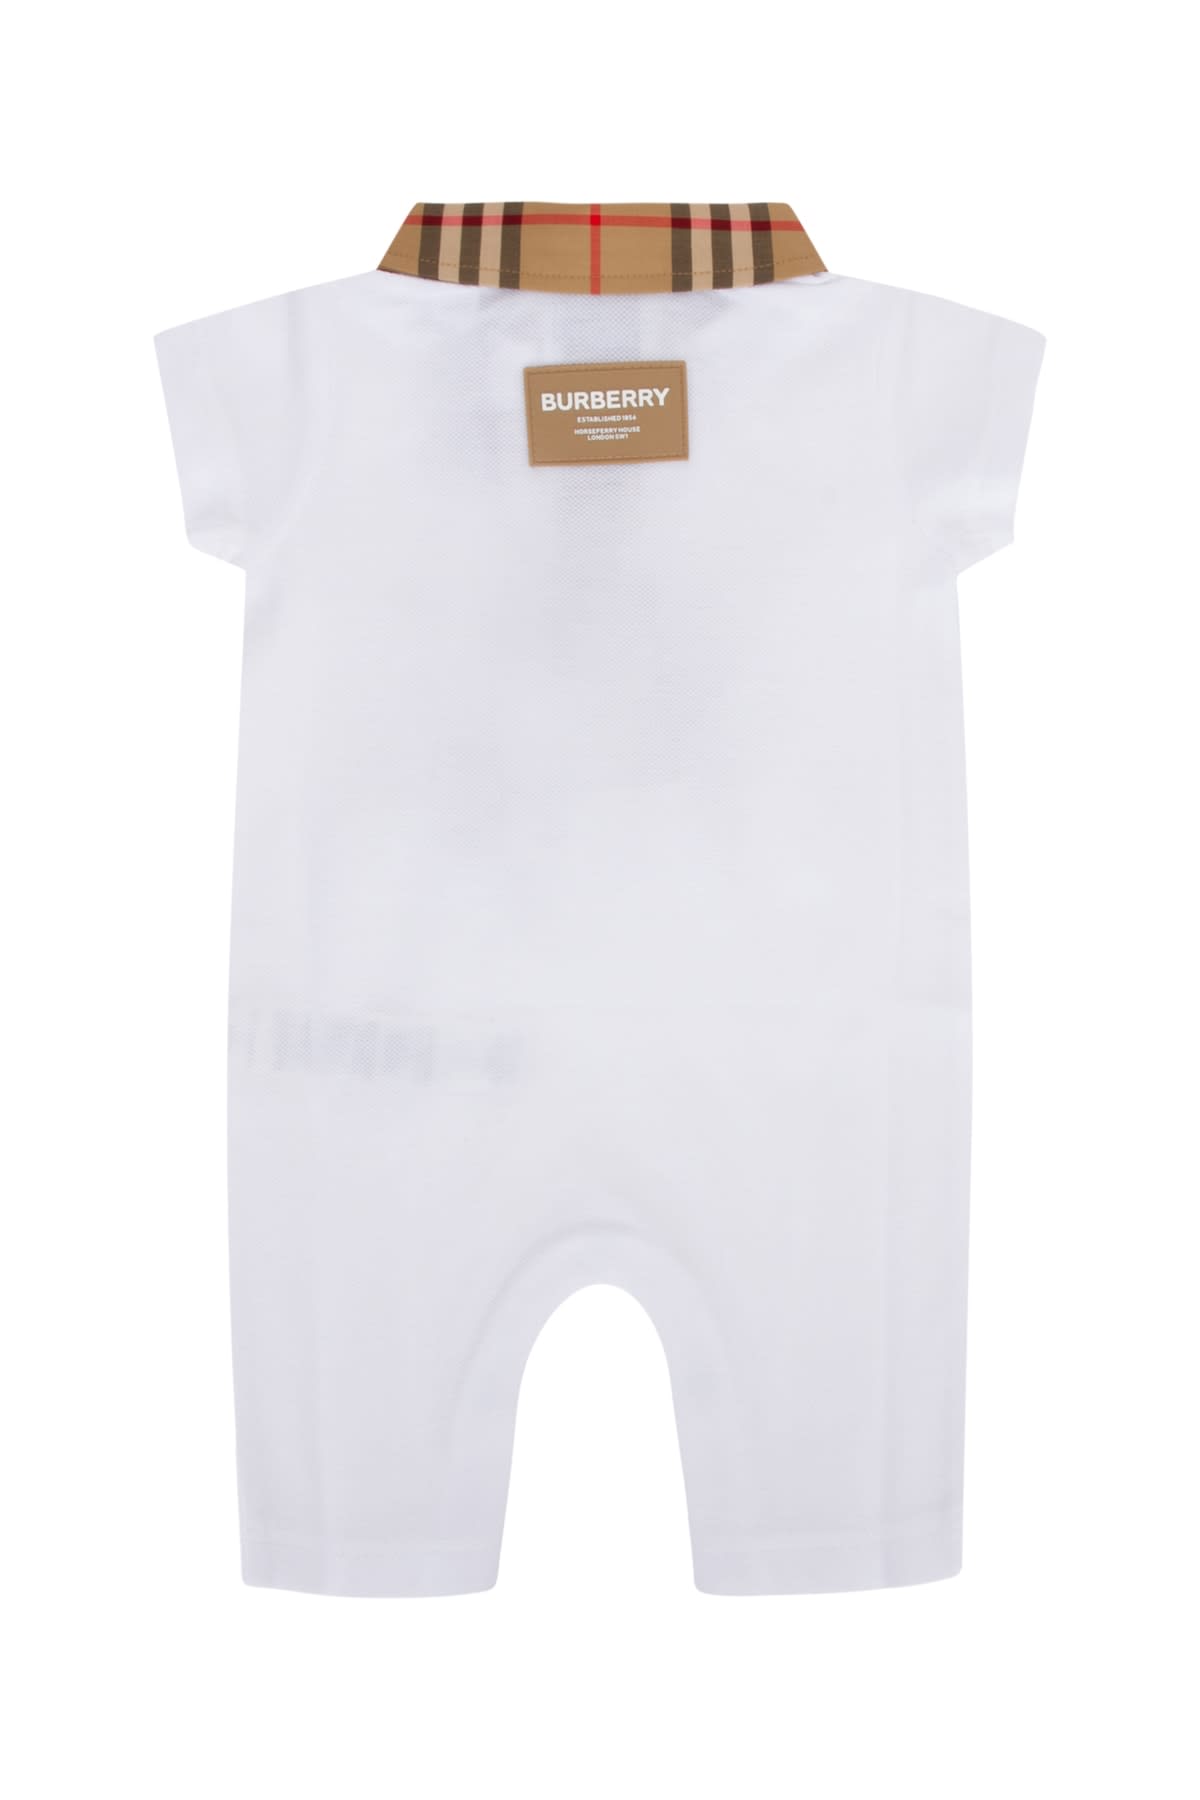 Burberry Babies' Pantalone In A1464